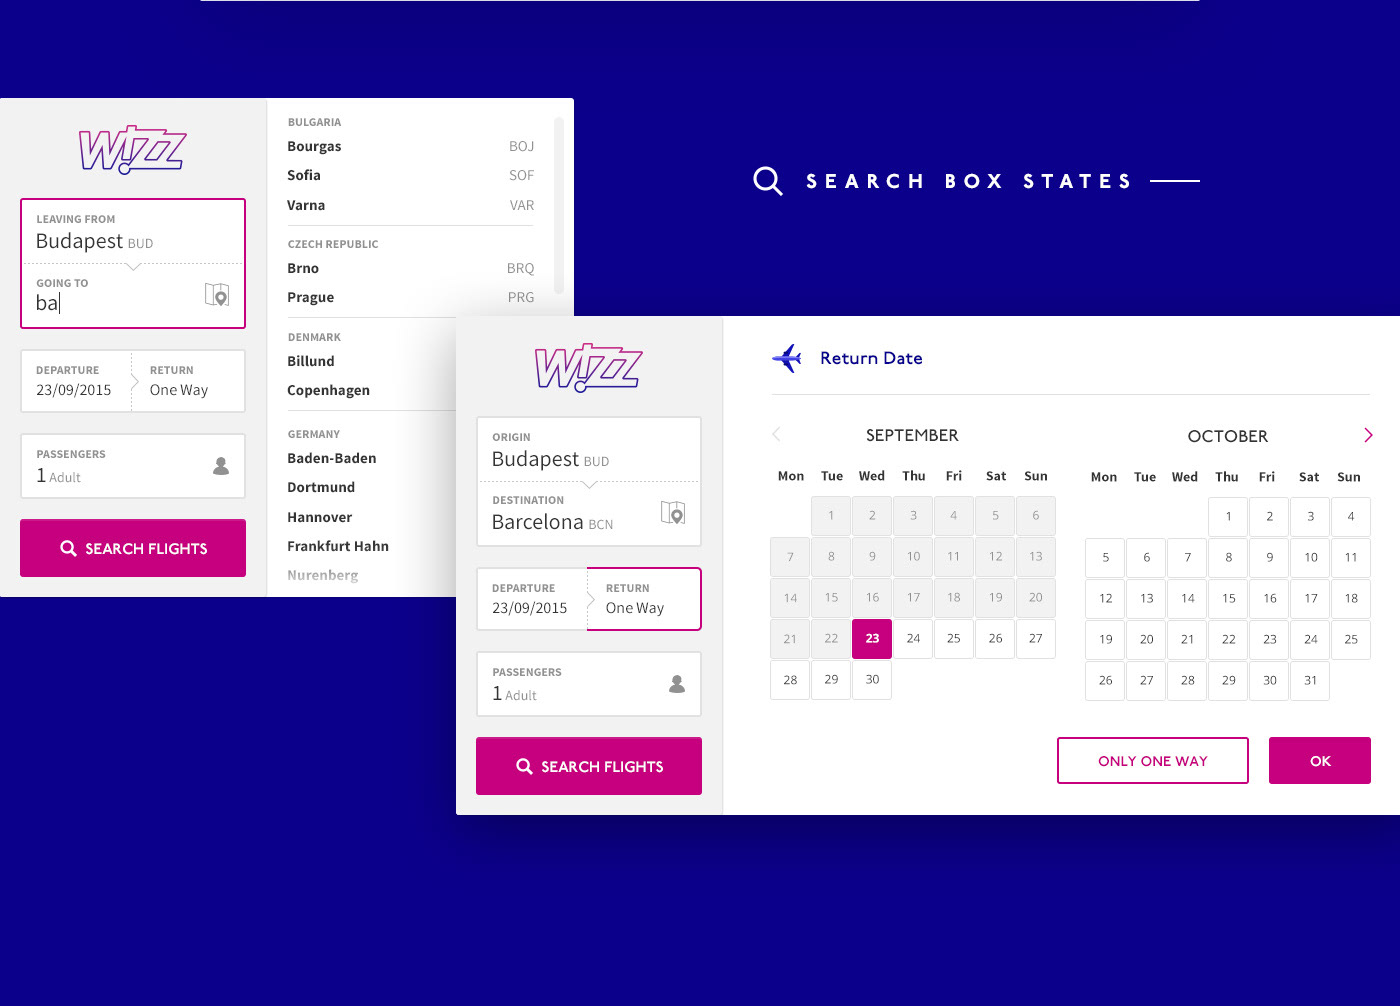 wizzair Webdesign mobile ux UI airplane Airlines wizz redesign Responsive